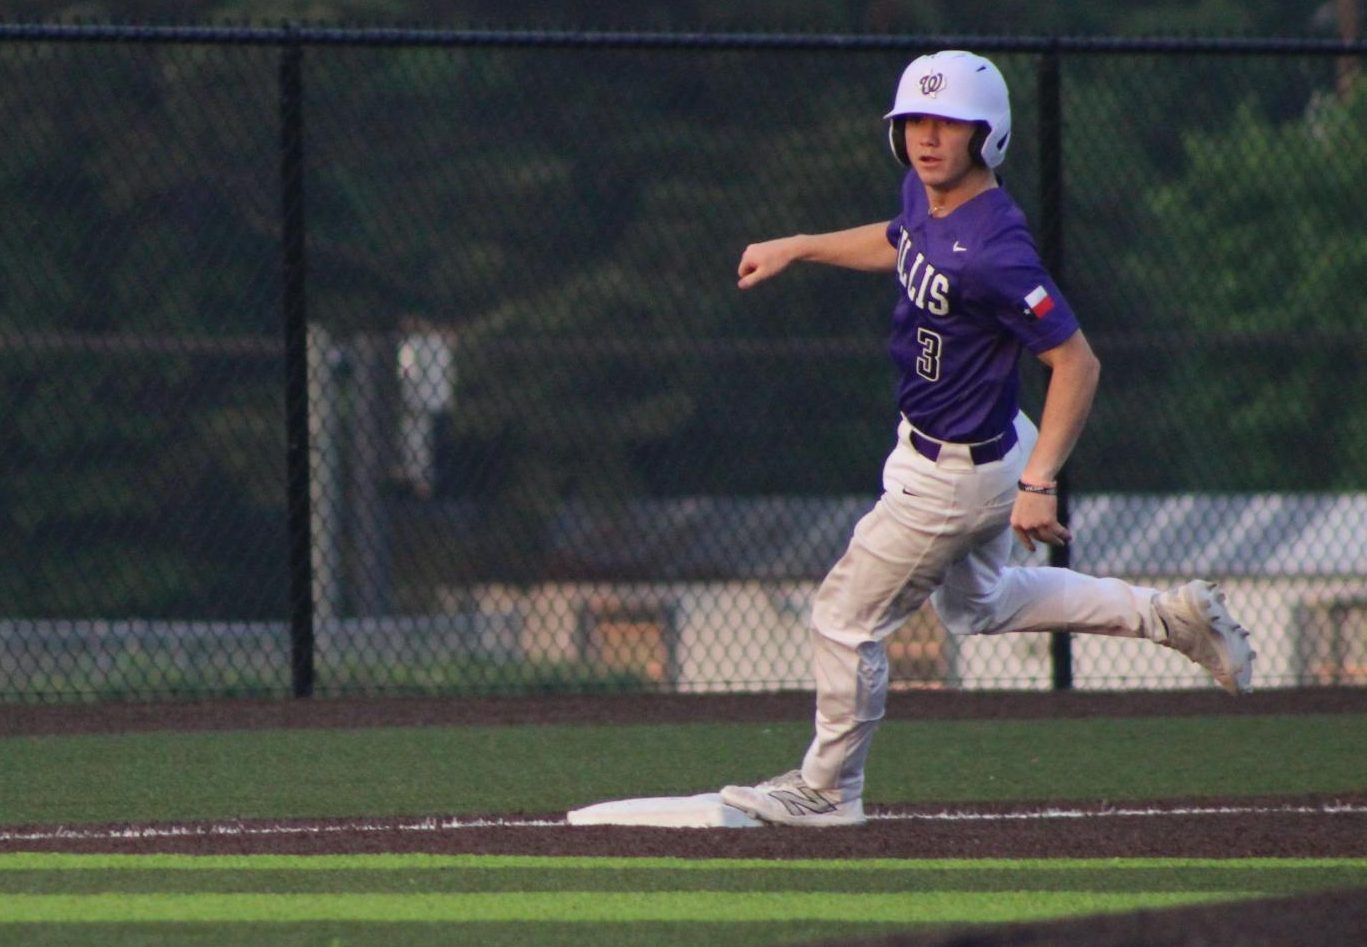 Willis Baseball Team’s ‘Out of This World’ Playoffs Journey Revealed